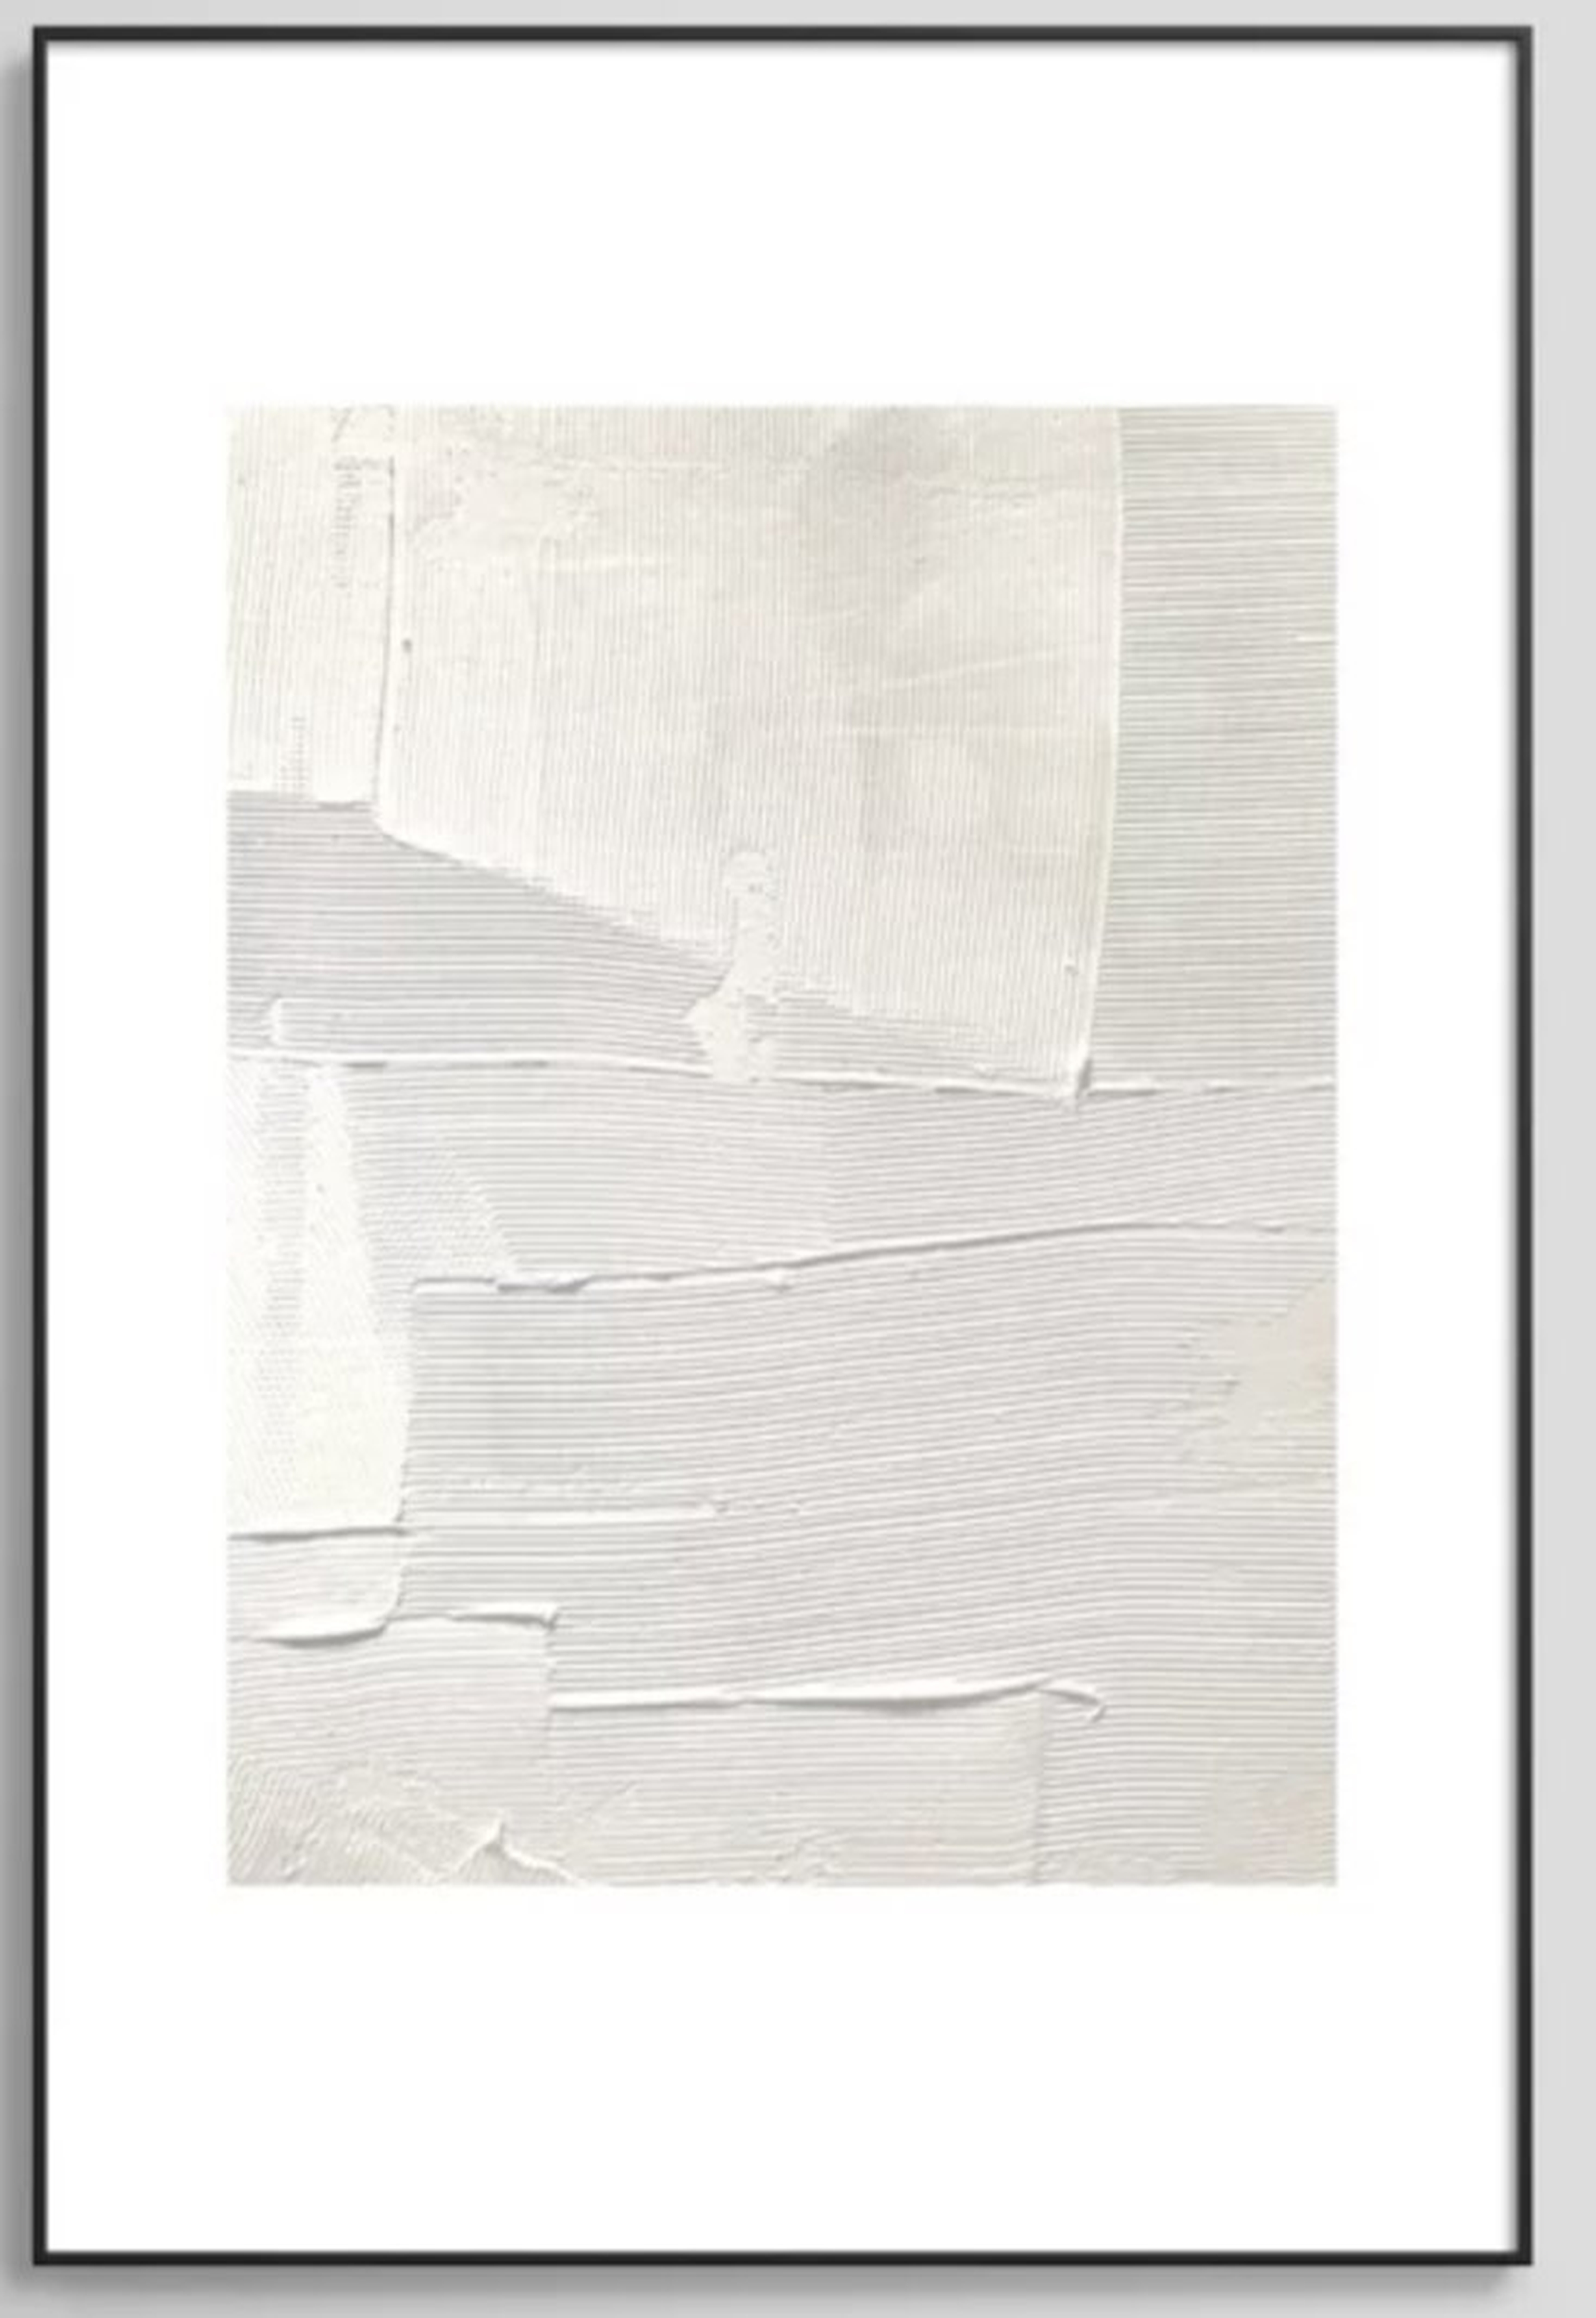 Relief [1]: An Abstract, Framed Art Print, 24" x 36" - Society6